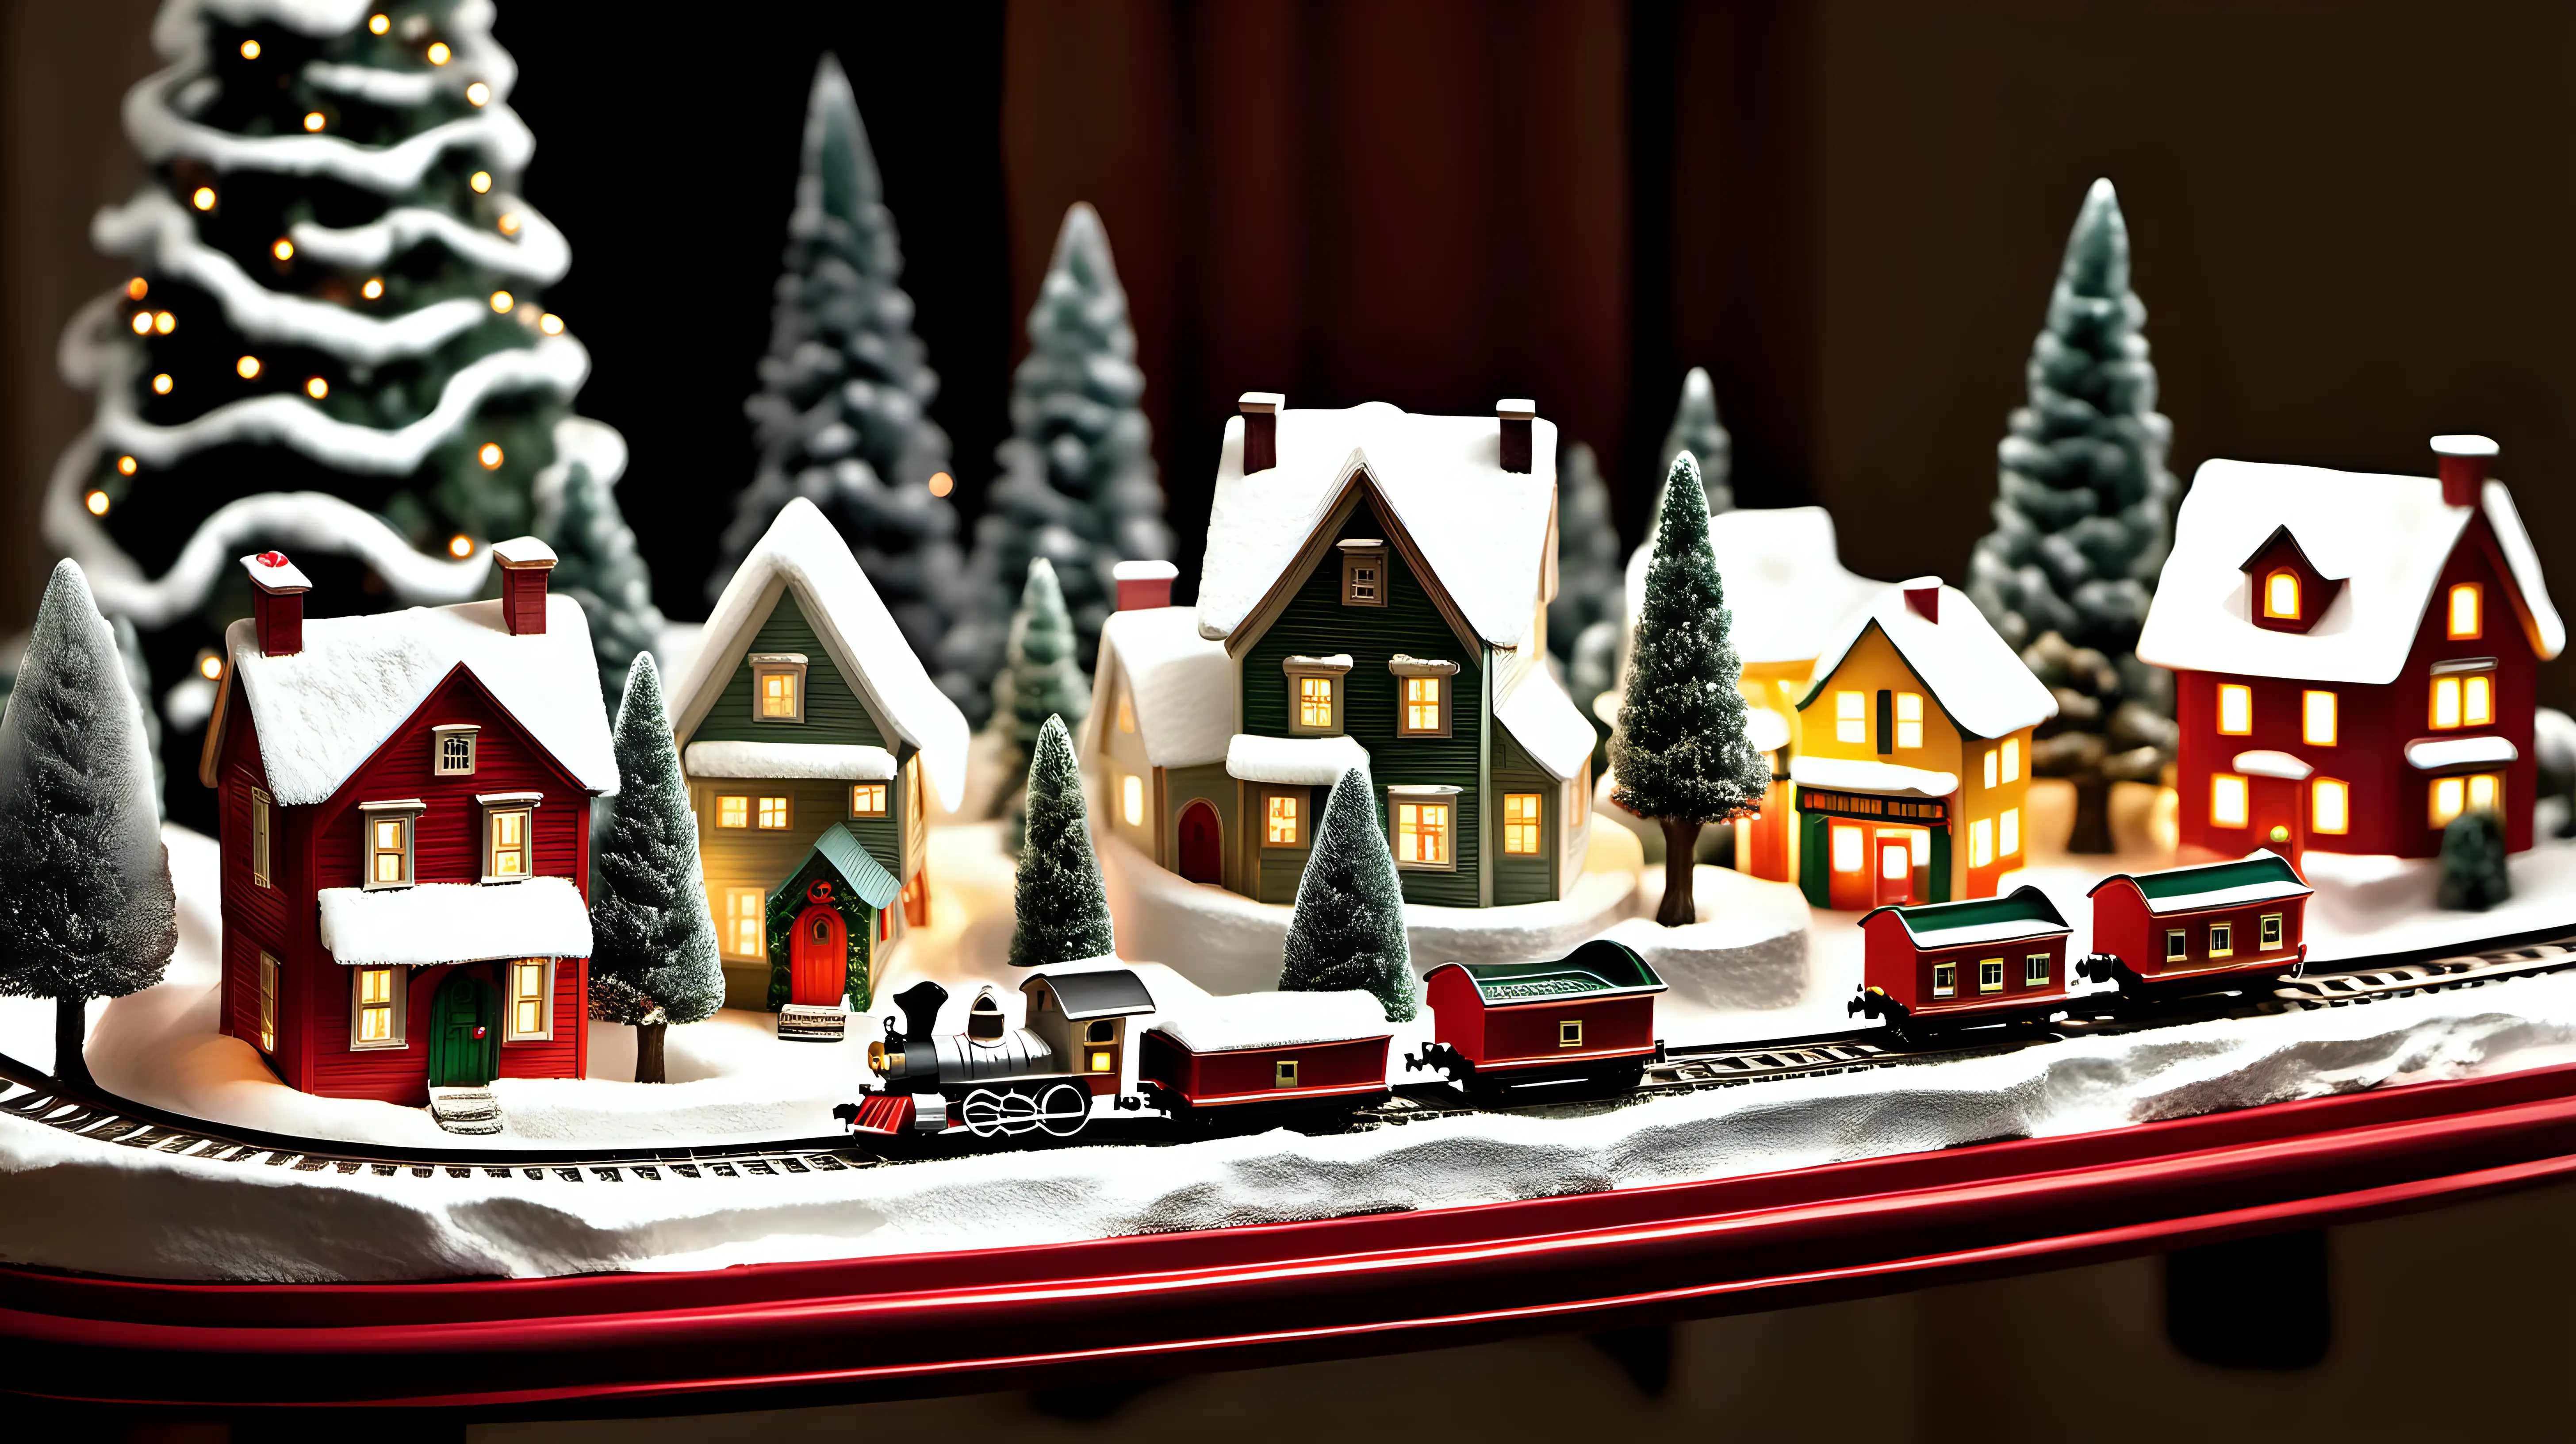 "Capture the whimsy of a miniature village nestled beneath the Christmas tree, complete with tiny houses, sparkling lights, and a miniature train circling the base."